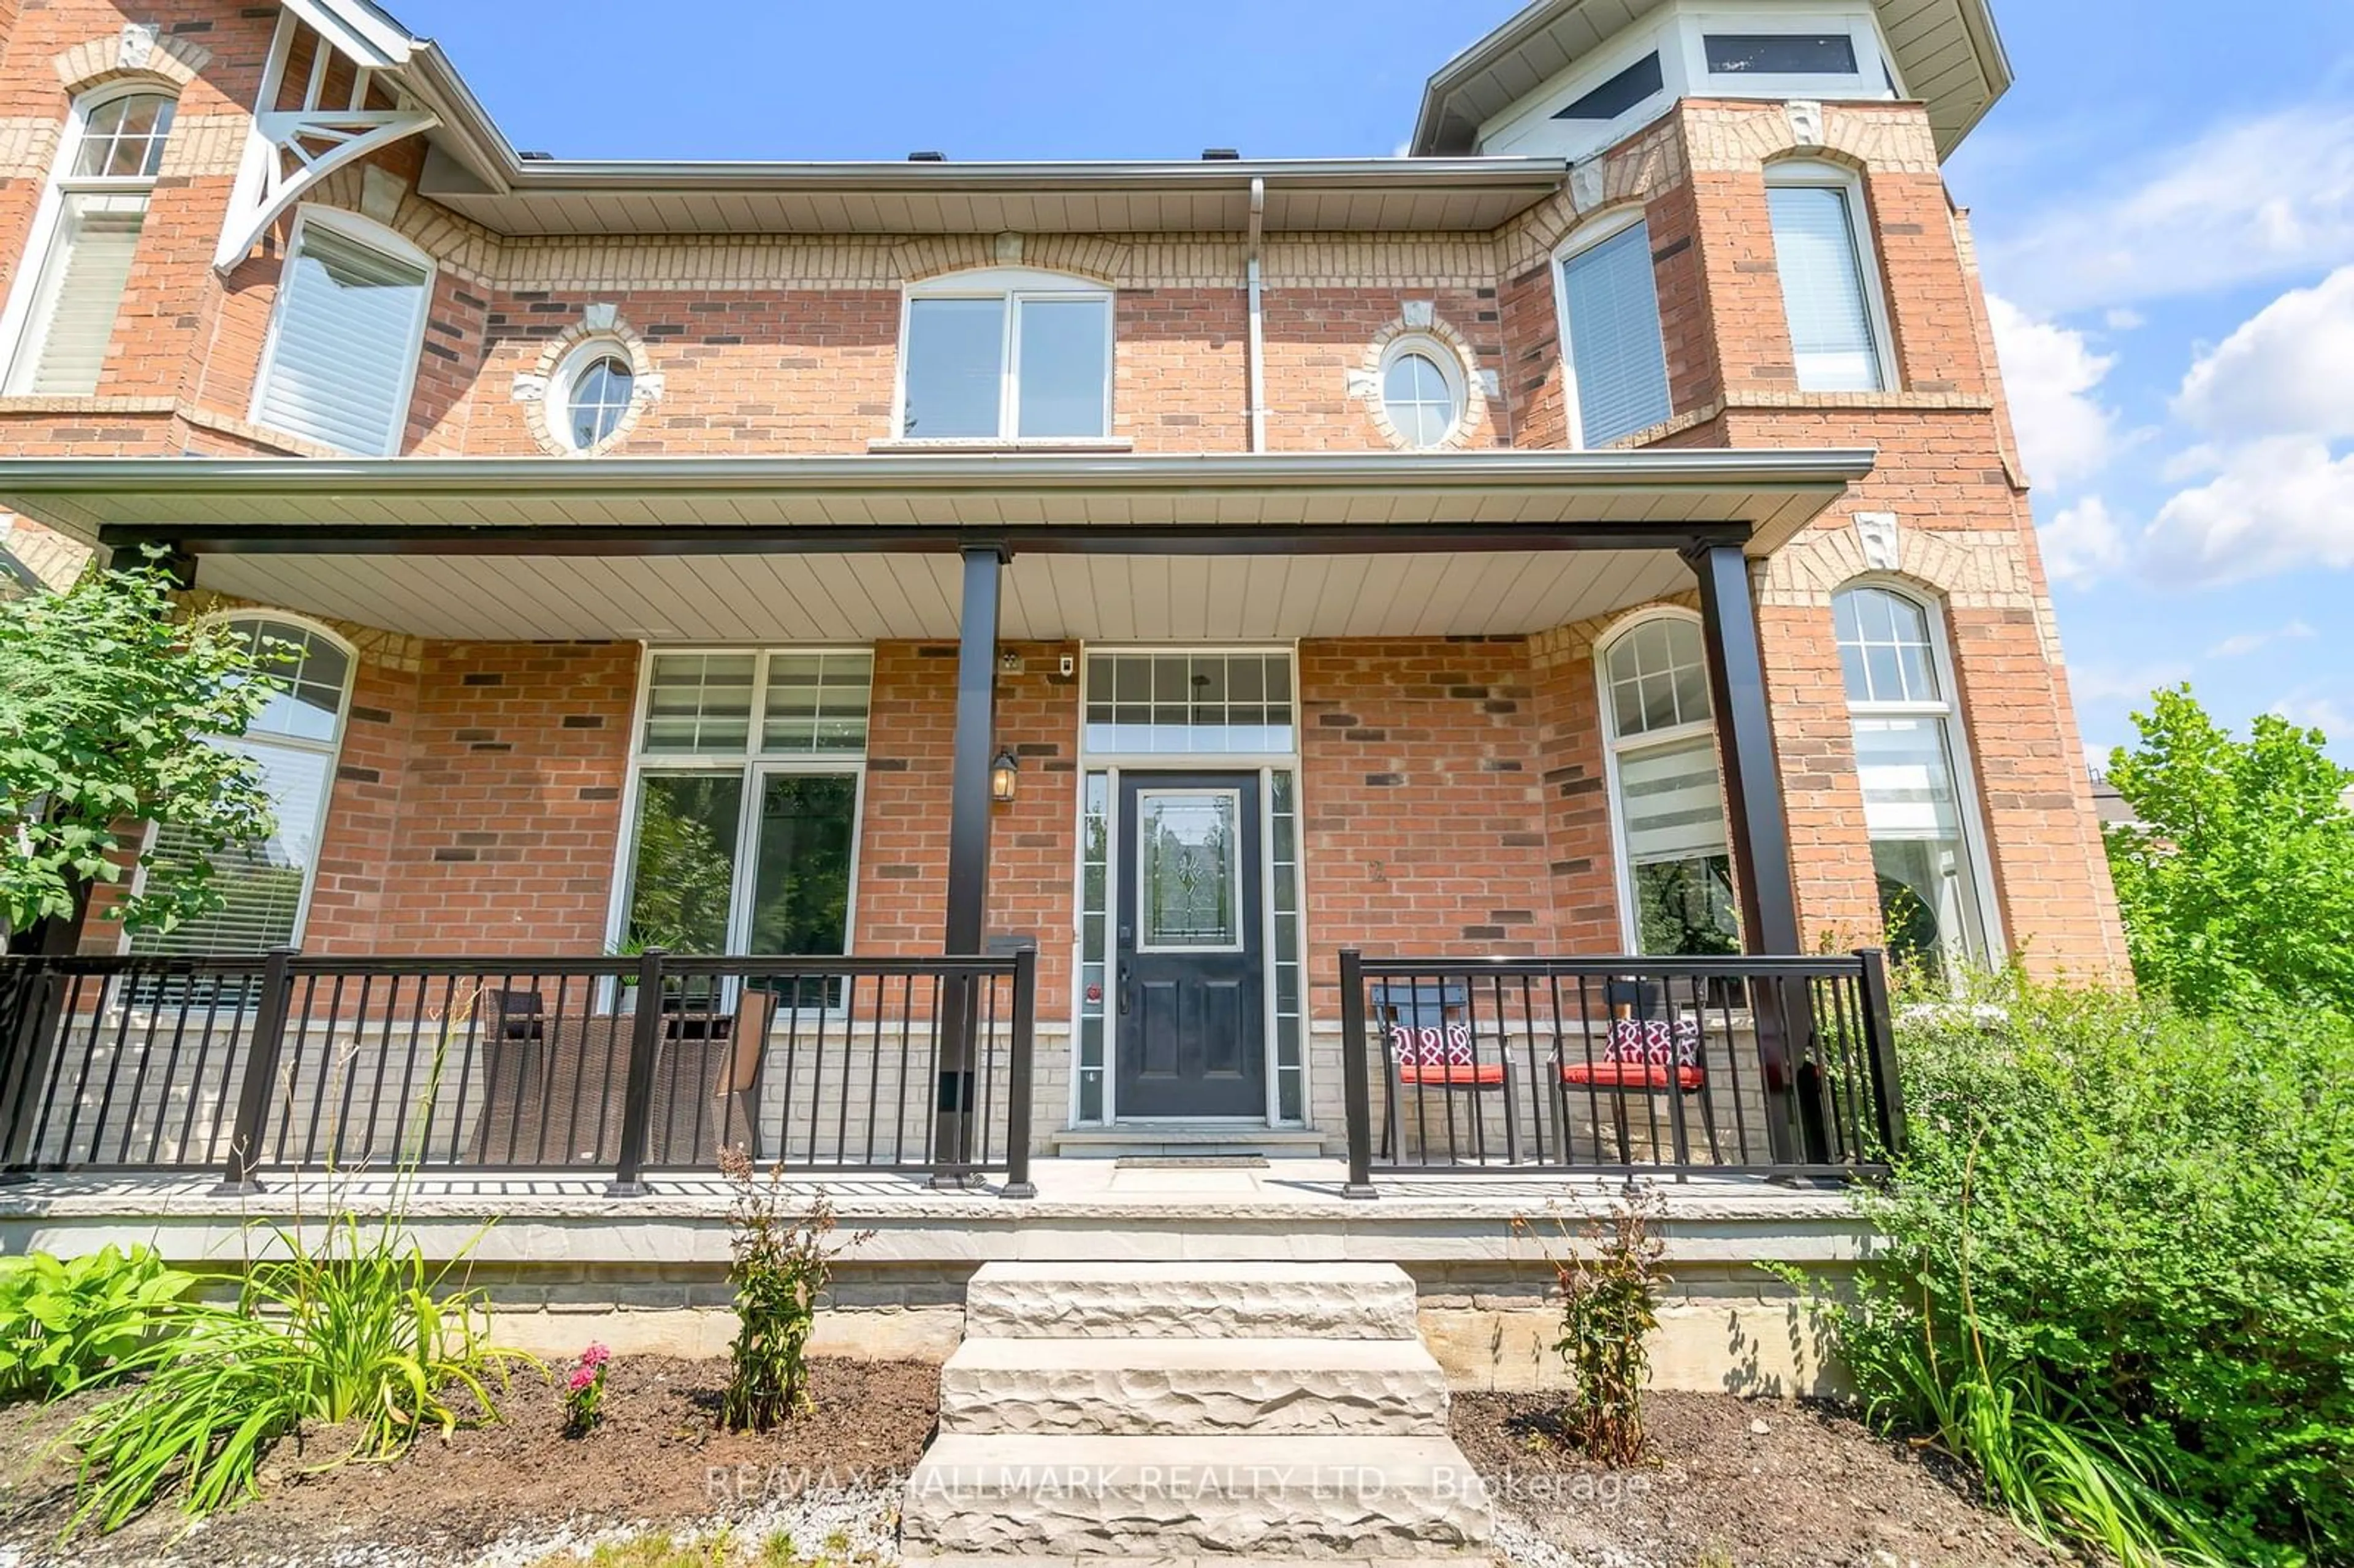 Home with brick exterior material for 2 Cornell Meadows Ave, Markham Ontario L6B 1B6